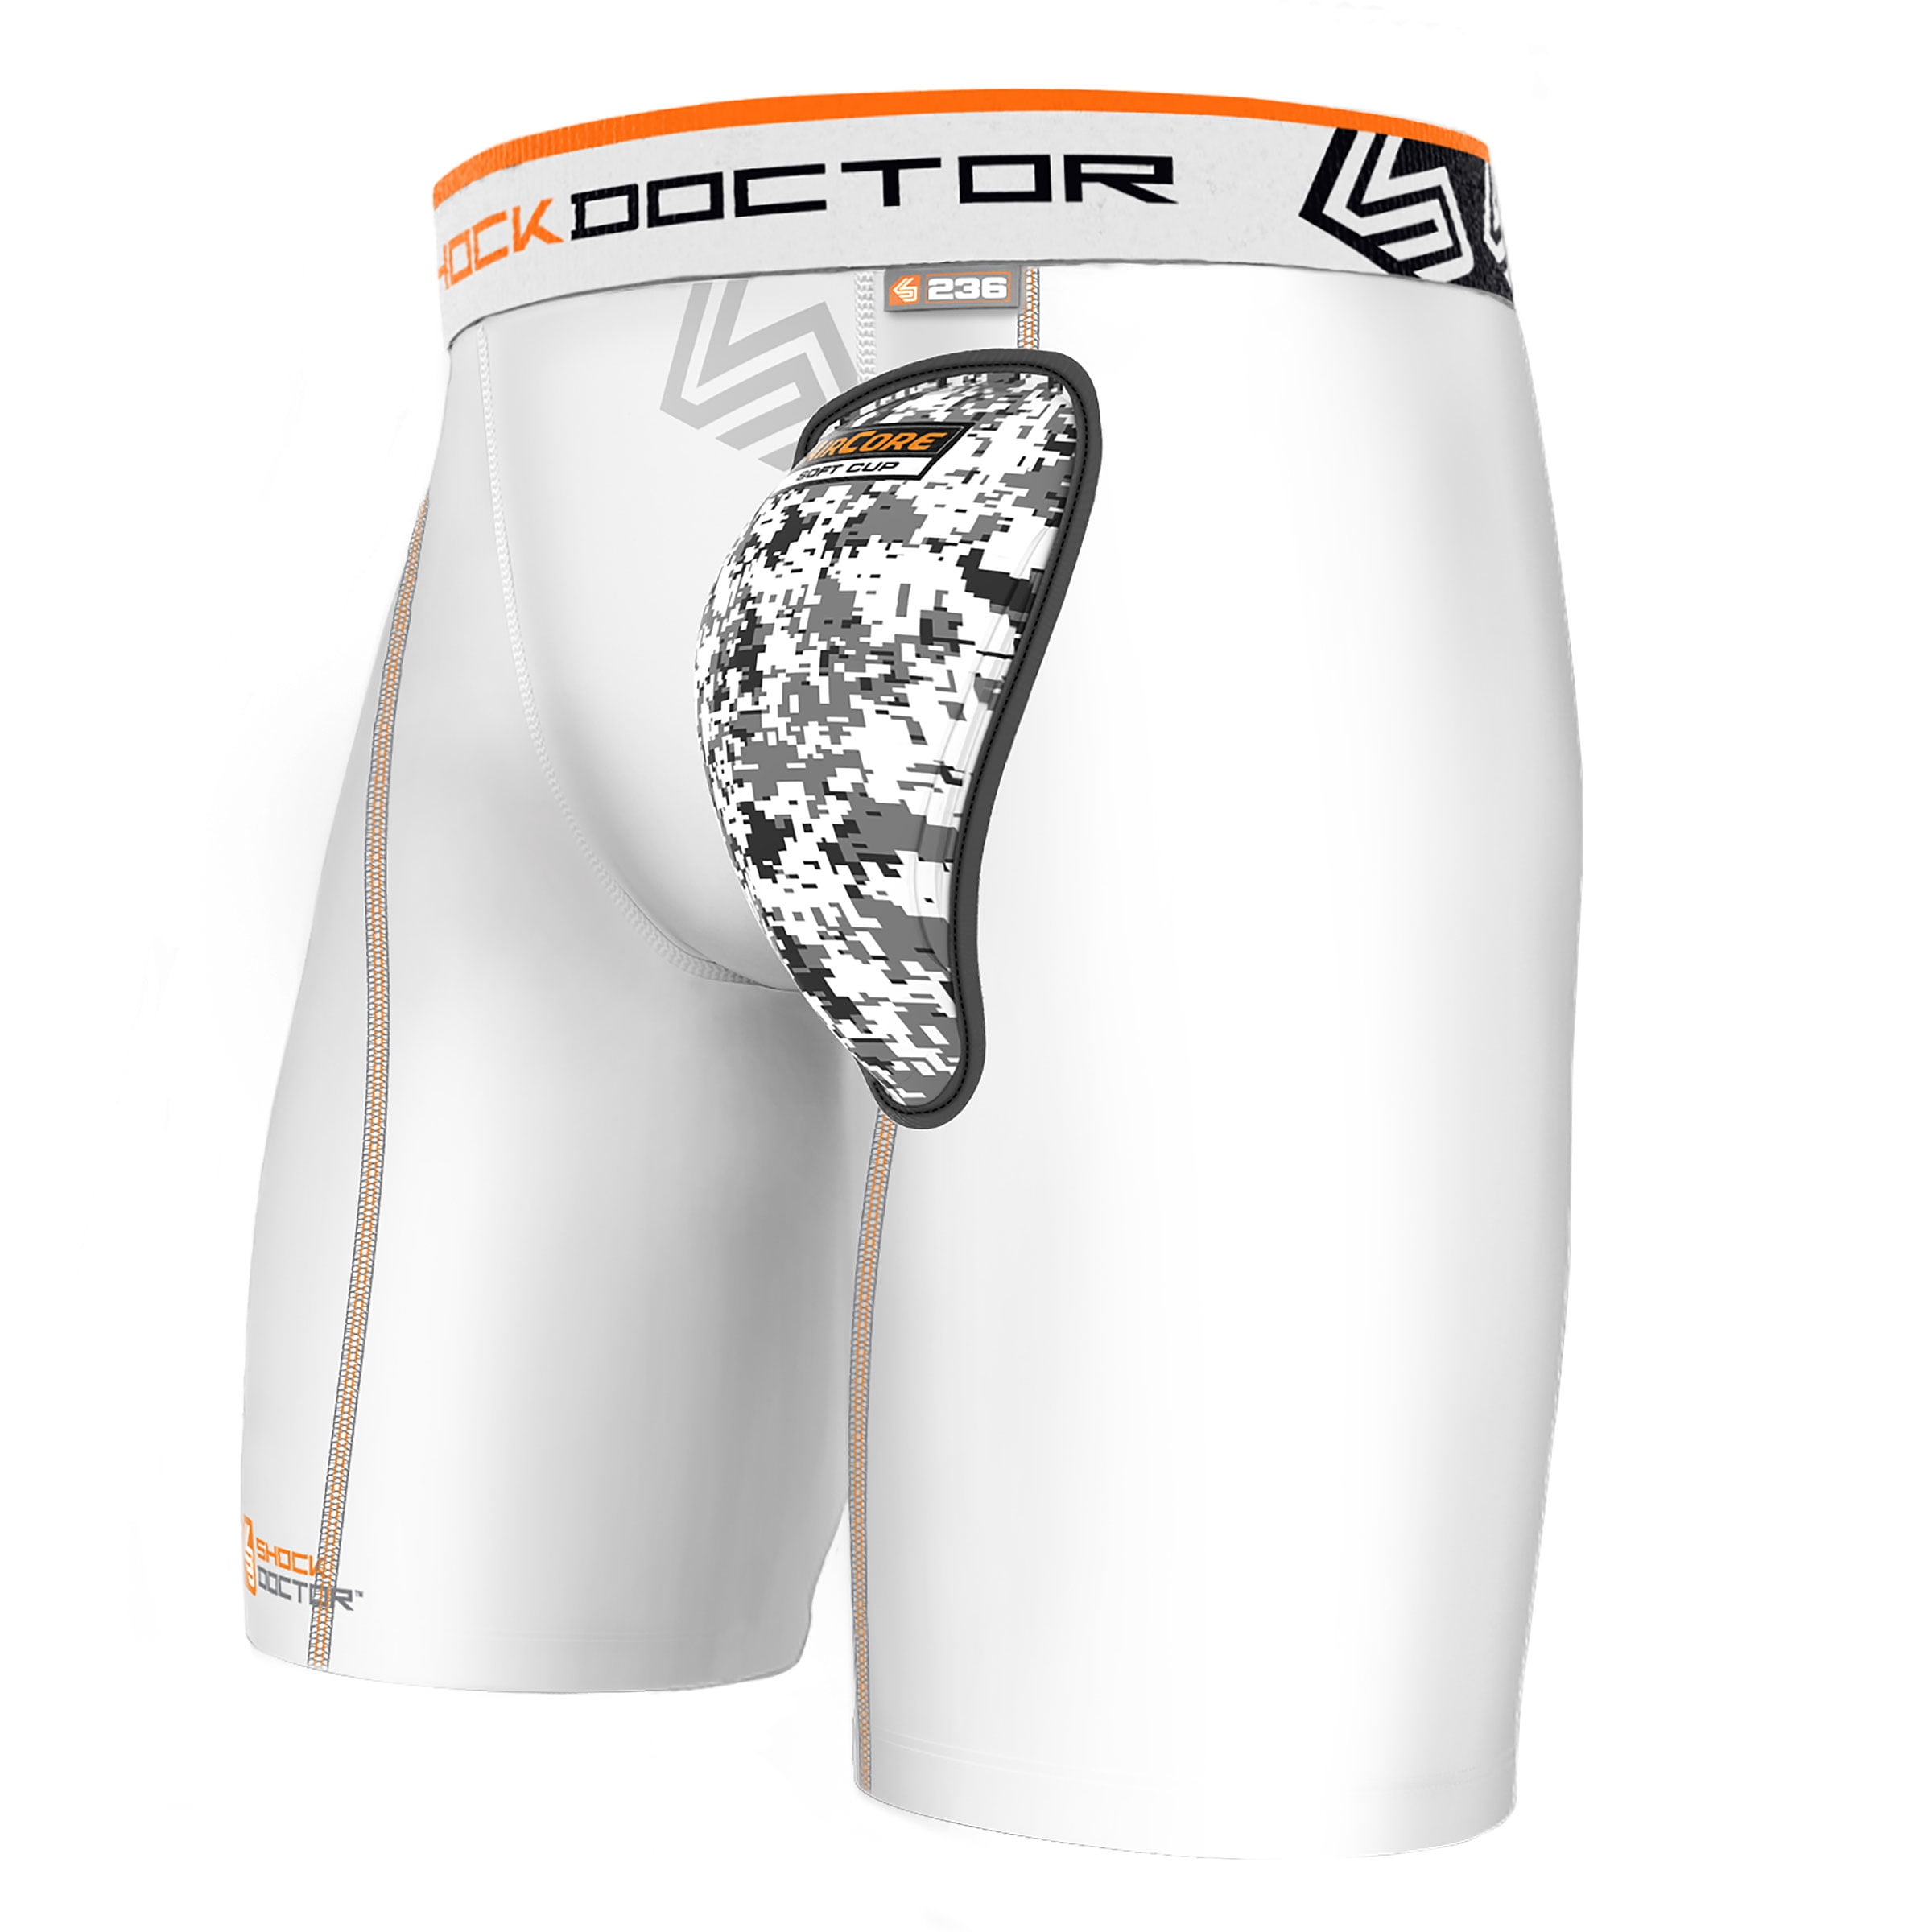 Boys,Youth & Adult Men Shock Doctor Compression Shorts with Bio-Flex Supporter Cup Included 